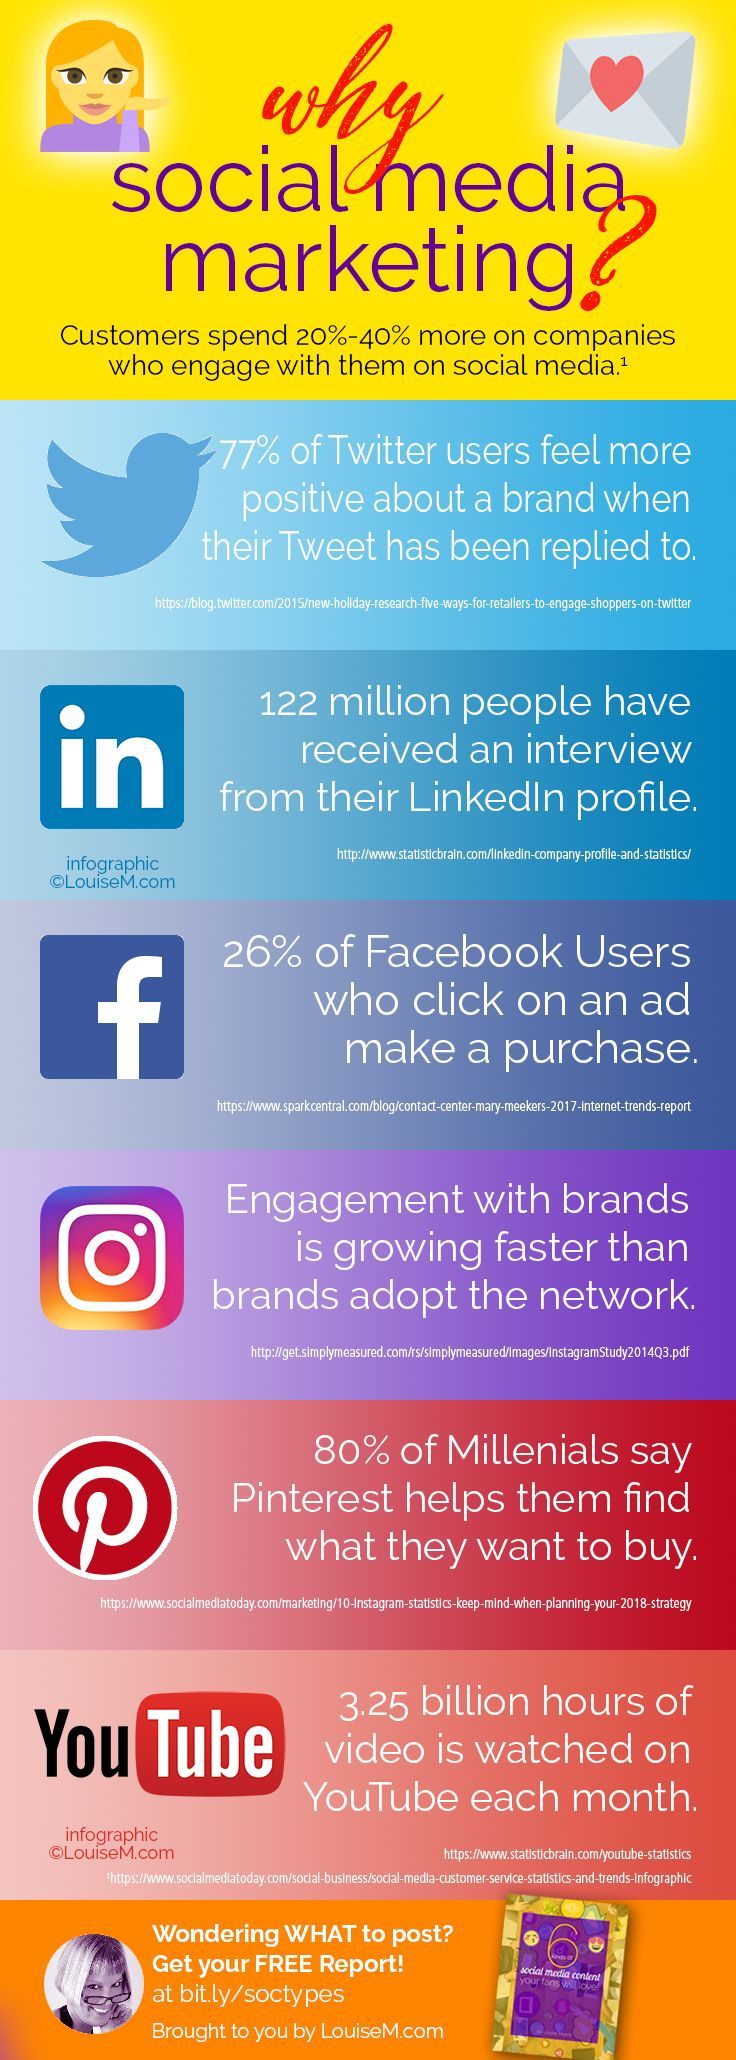 1529649348_72_Marketing-Infographic-Top-2018-stats-on-social-media-marketing-Click-to-visit-the-massive-expert-roun Marketing Infographic : Top 2018 stats on social media marketing! Click to visit the massive expert roun...